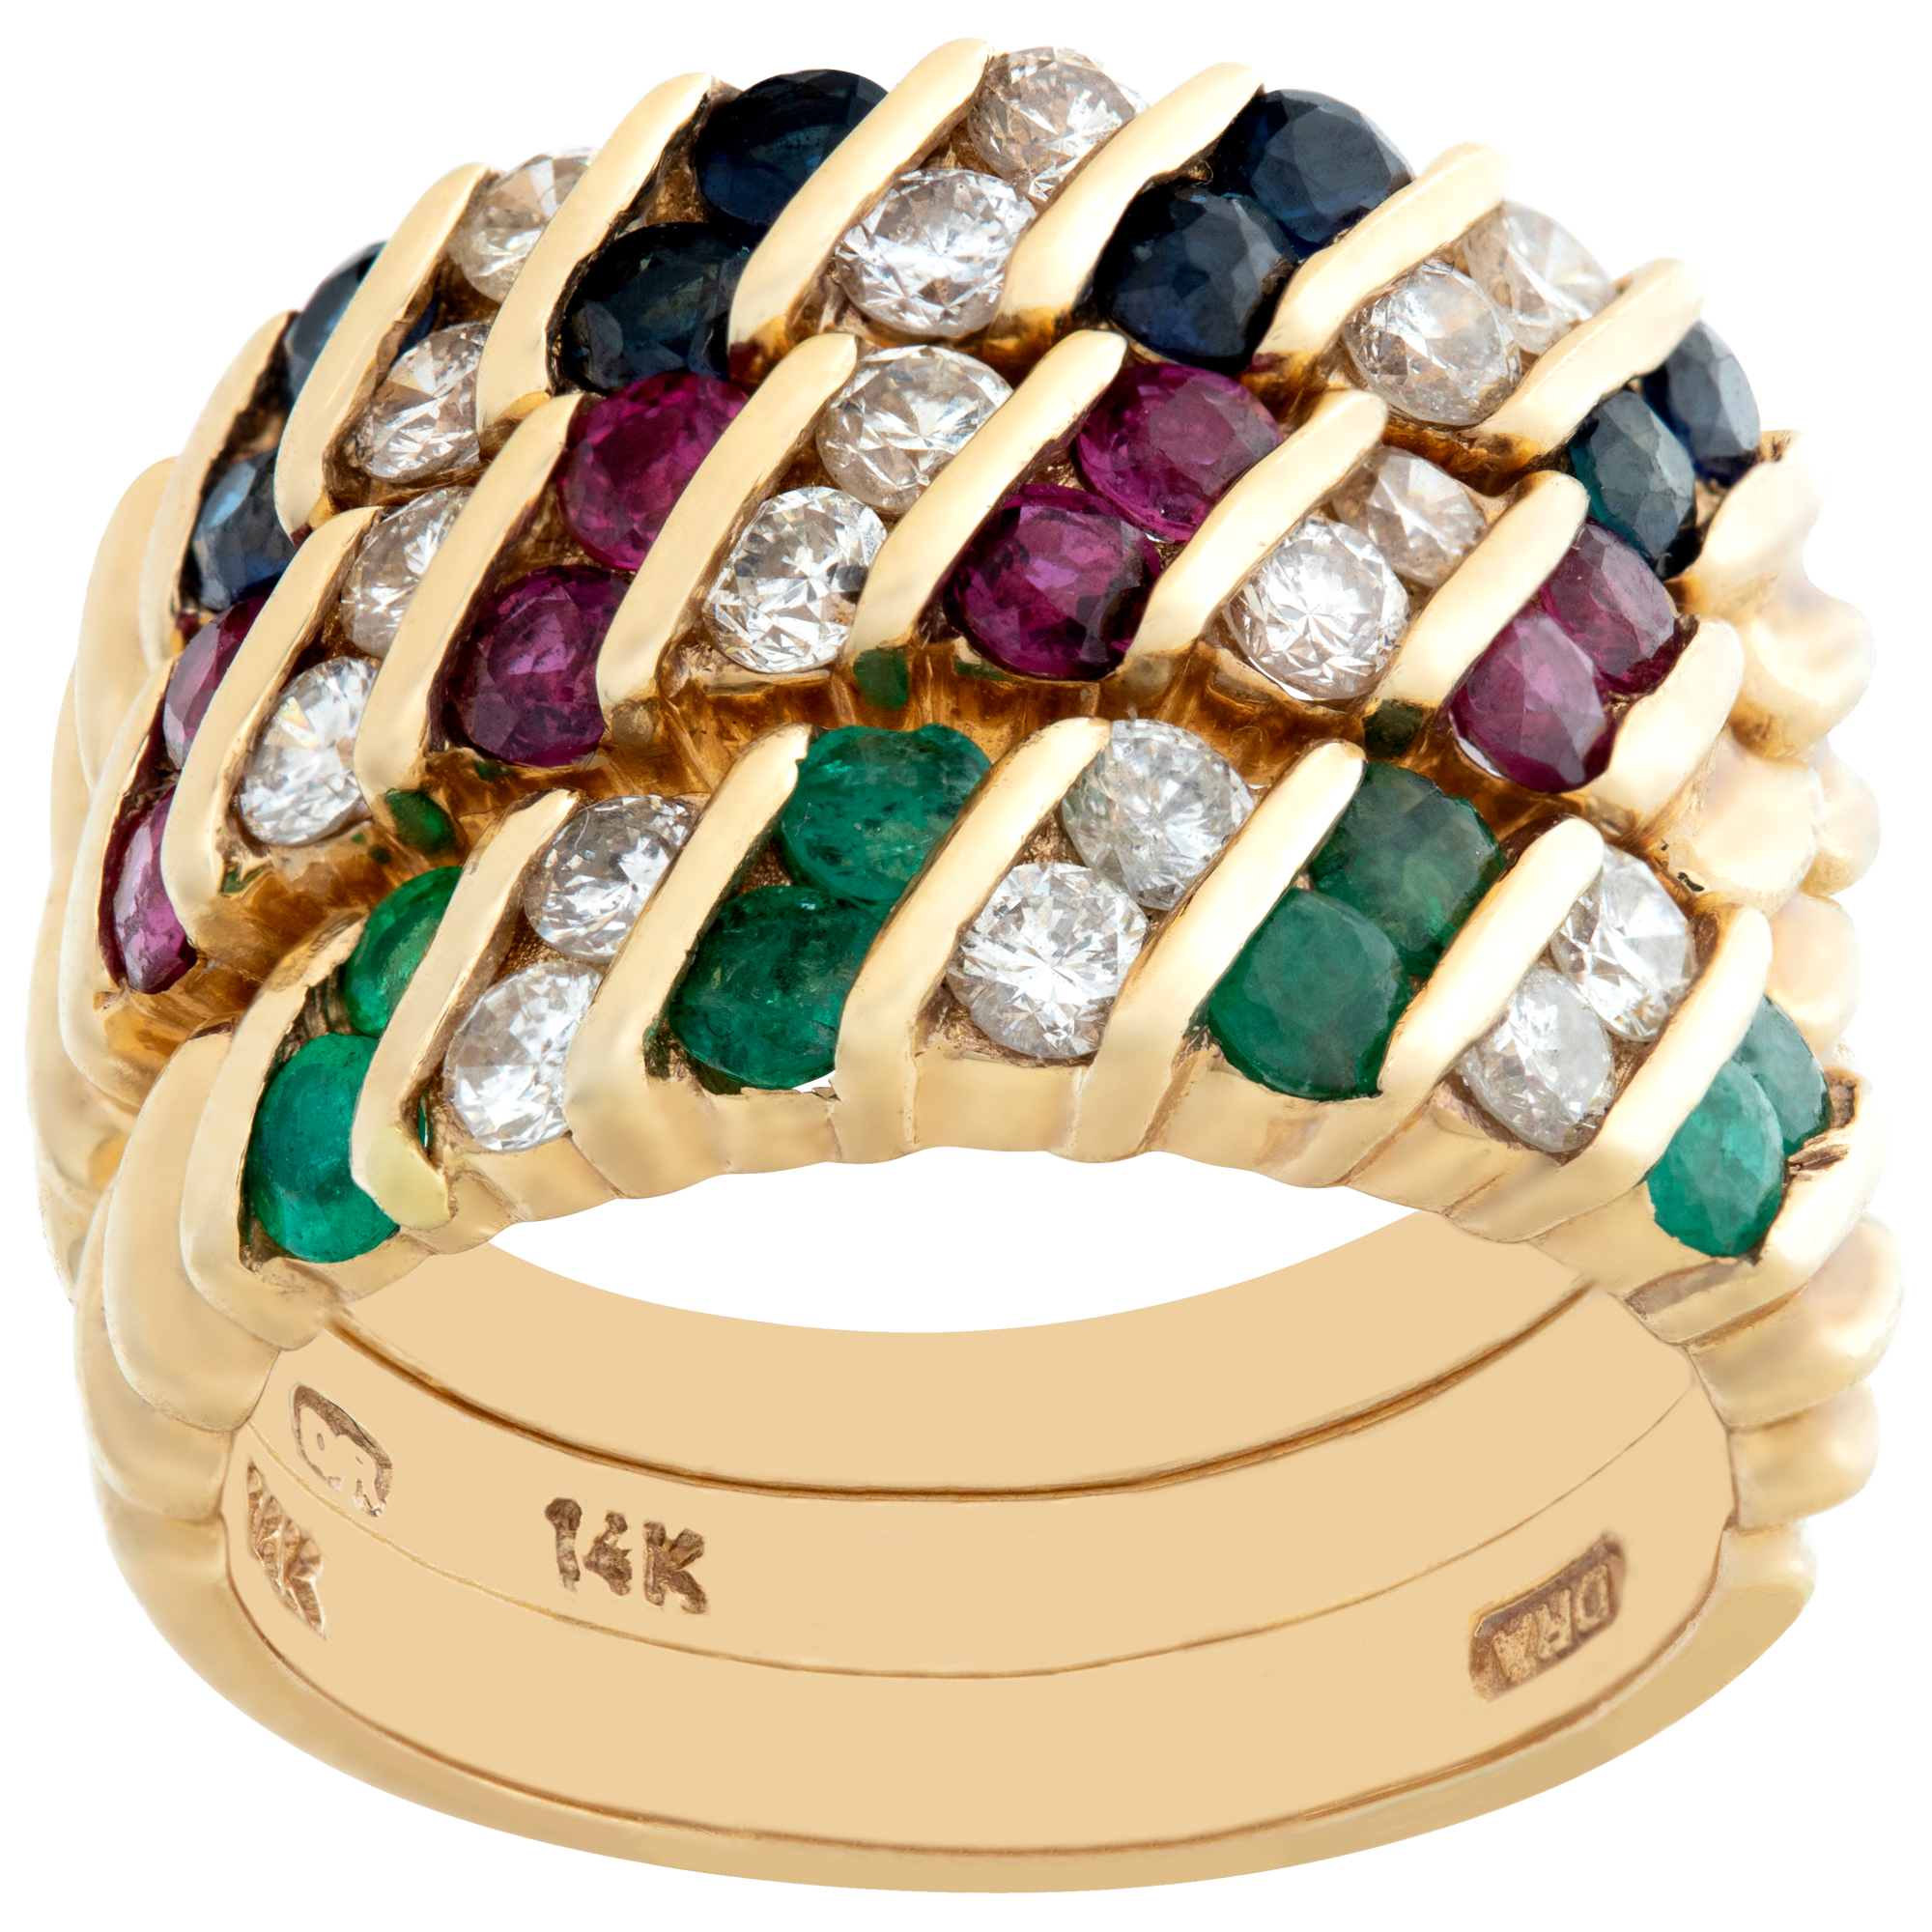 Set of 3 rings in 14k yellow gold with diamonds sapphires, rubies, emeralds